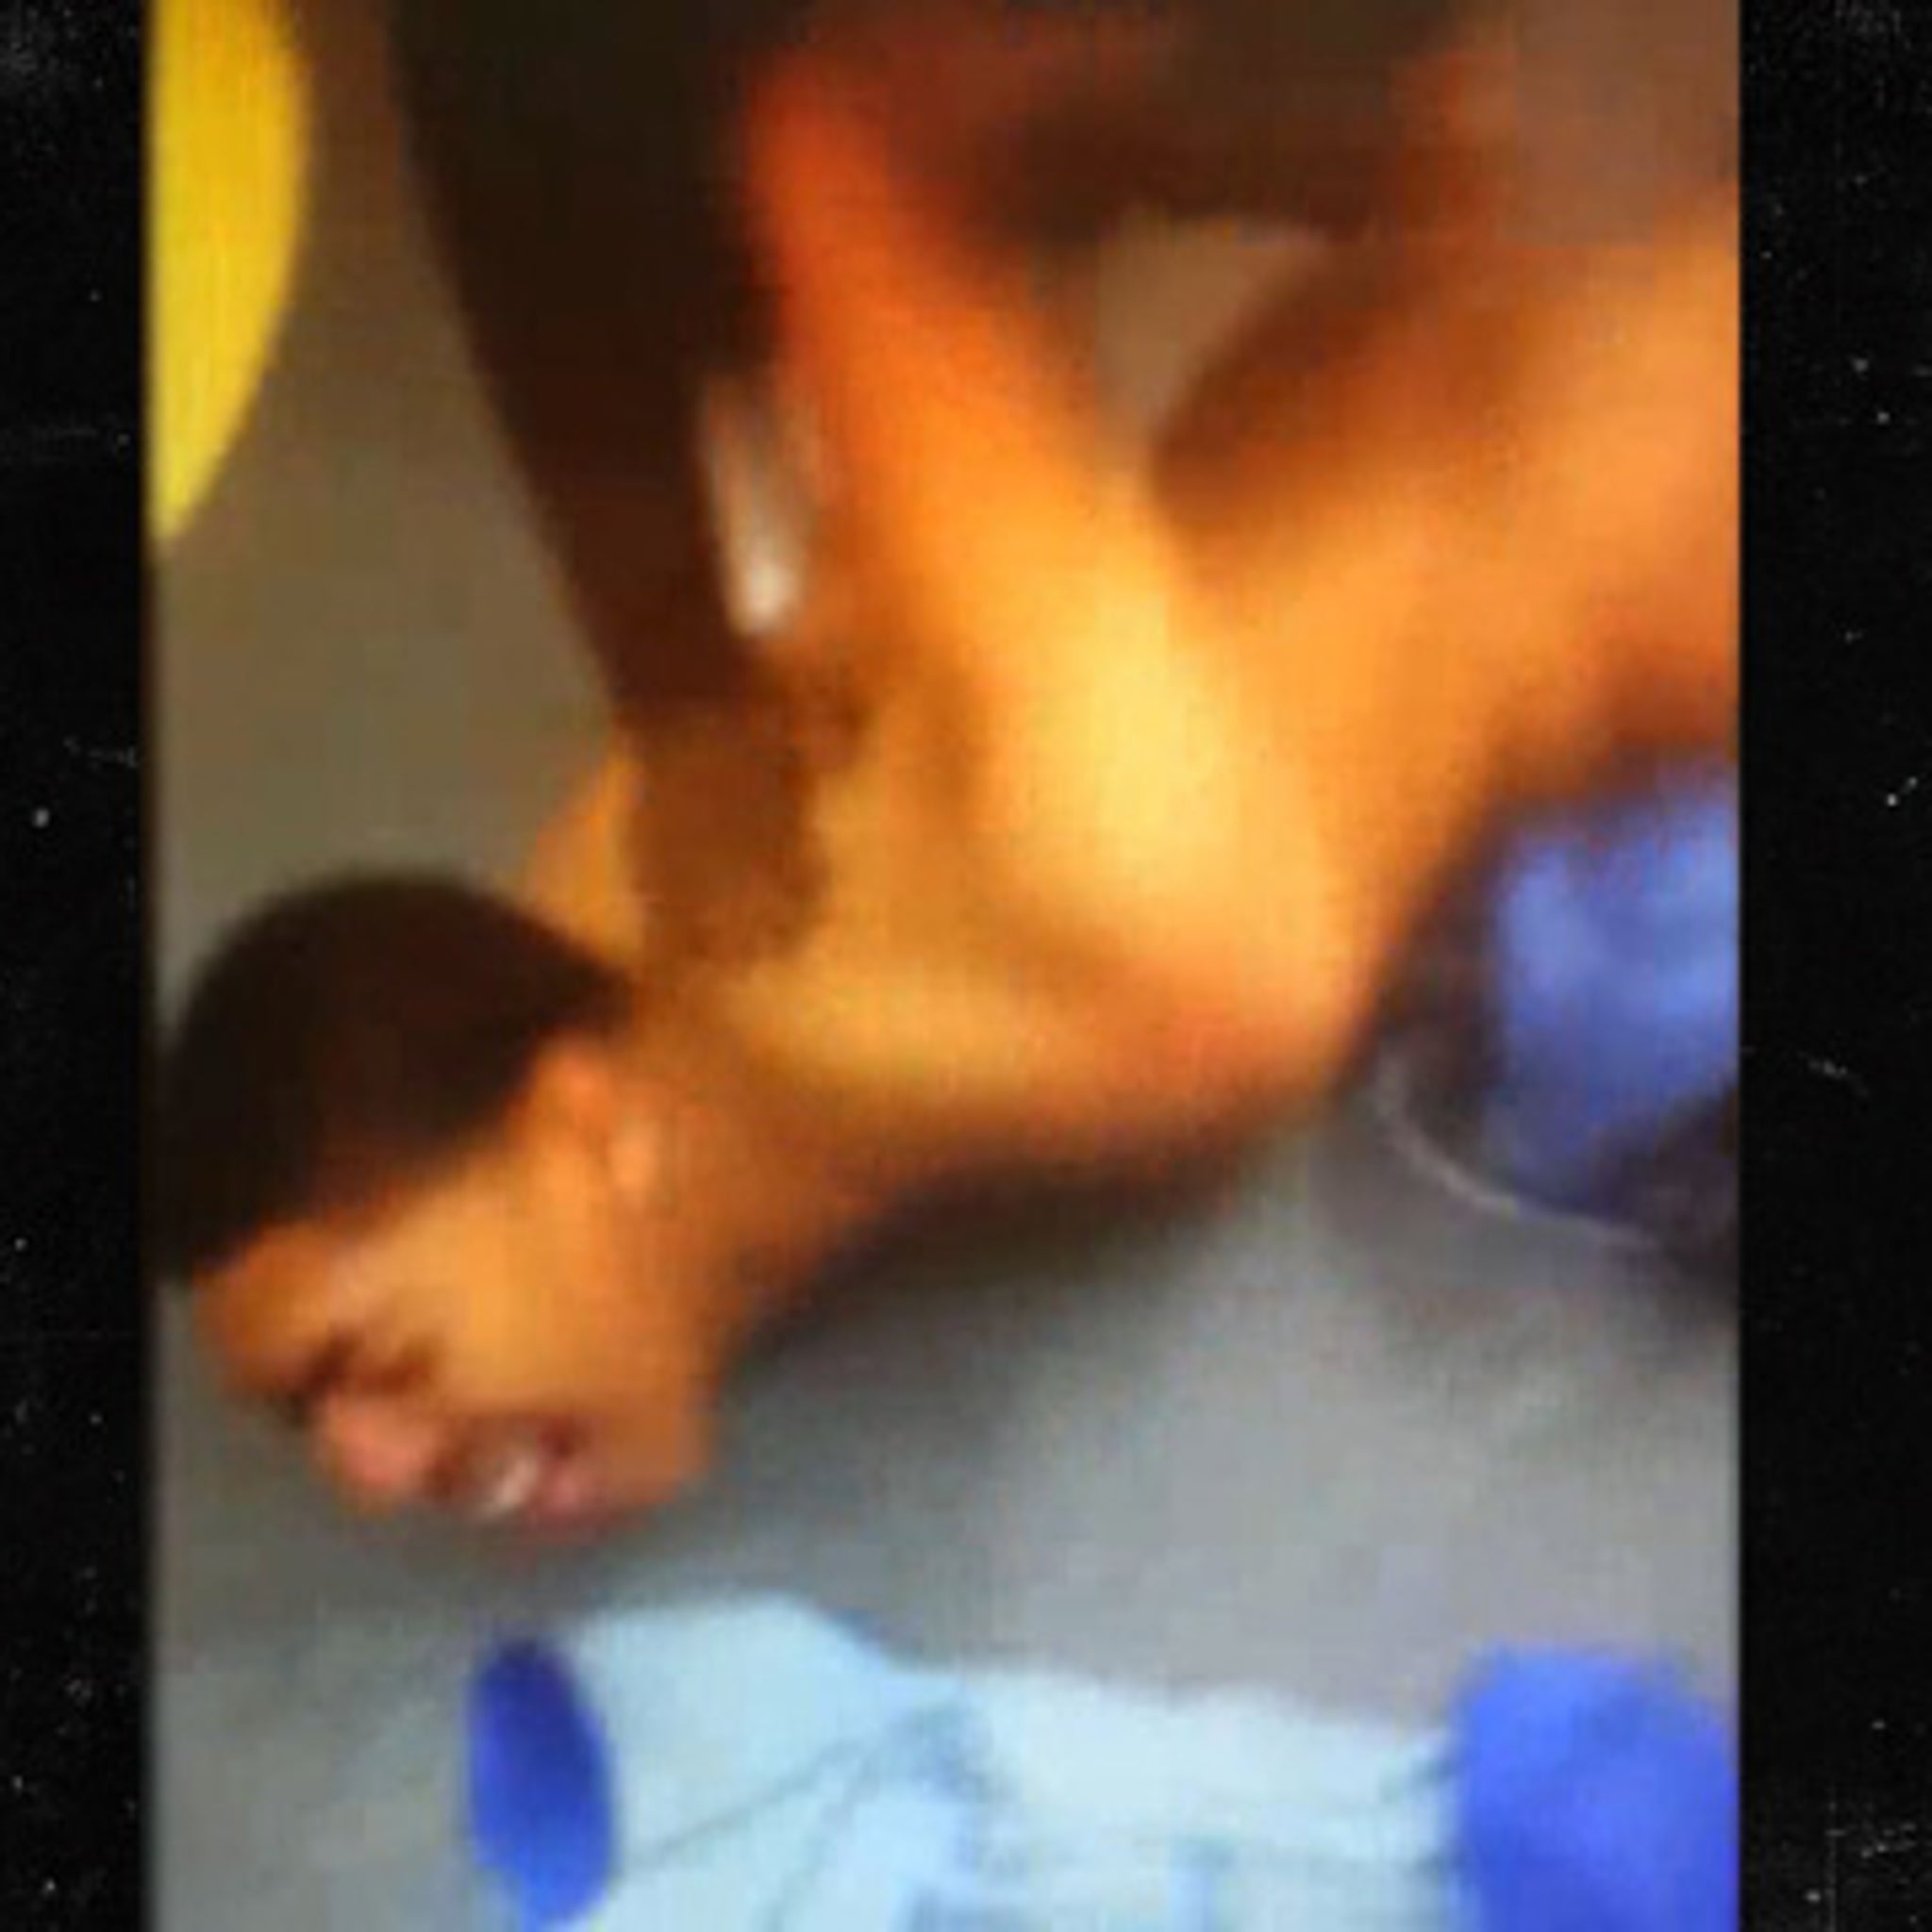 NBA Star Anthony Davis -- Alleged College Hazing Video Surfaces